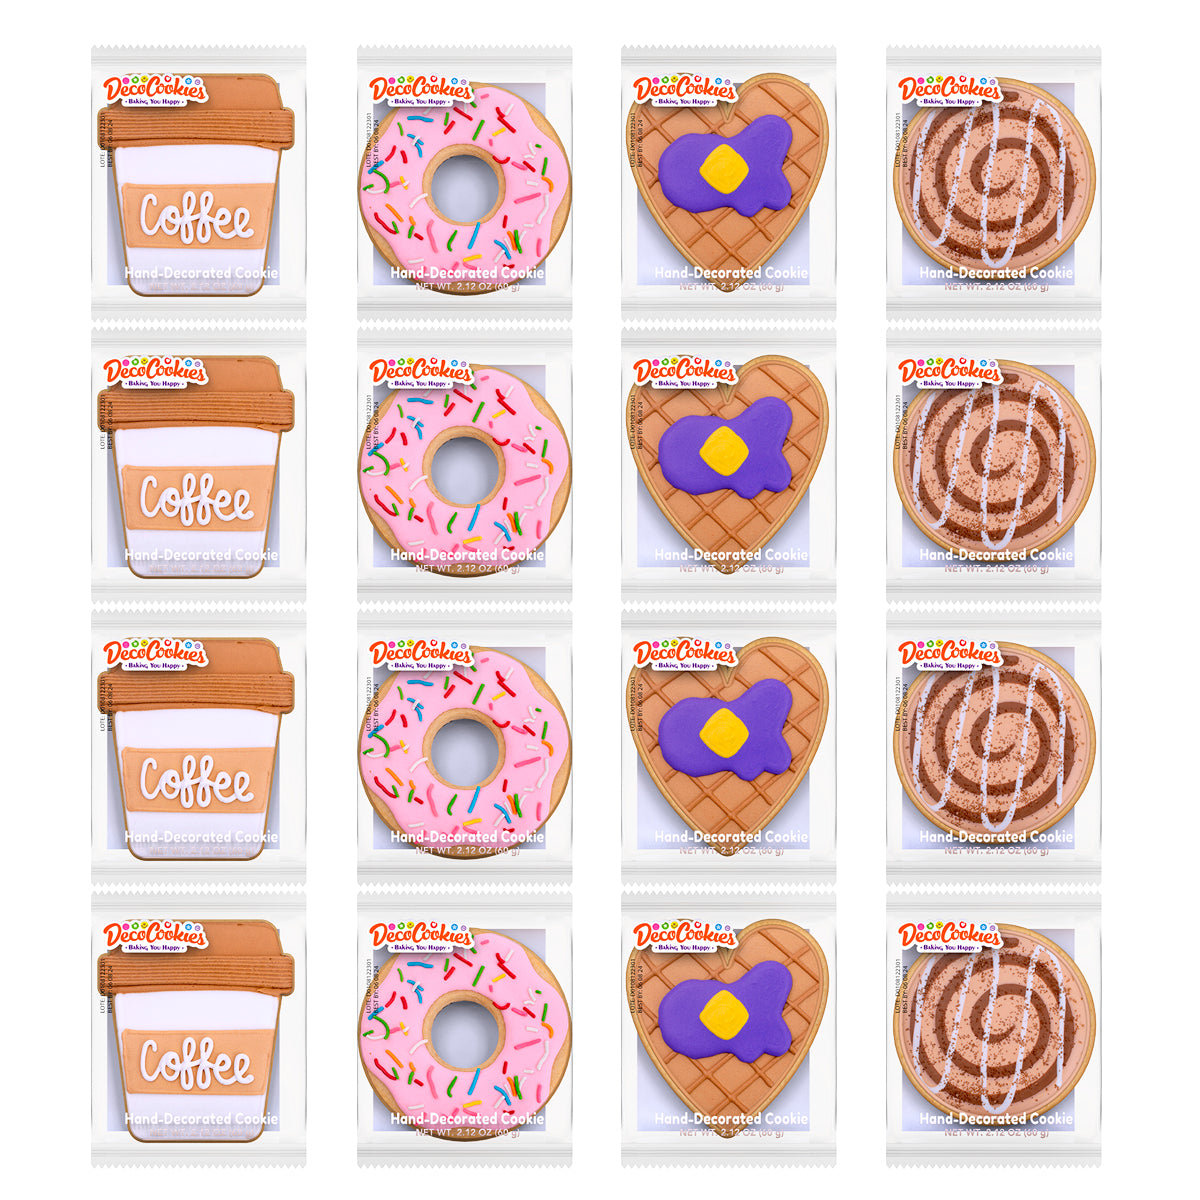 Coffee Lover Hand-Decorated Cookies - 16 ct